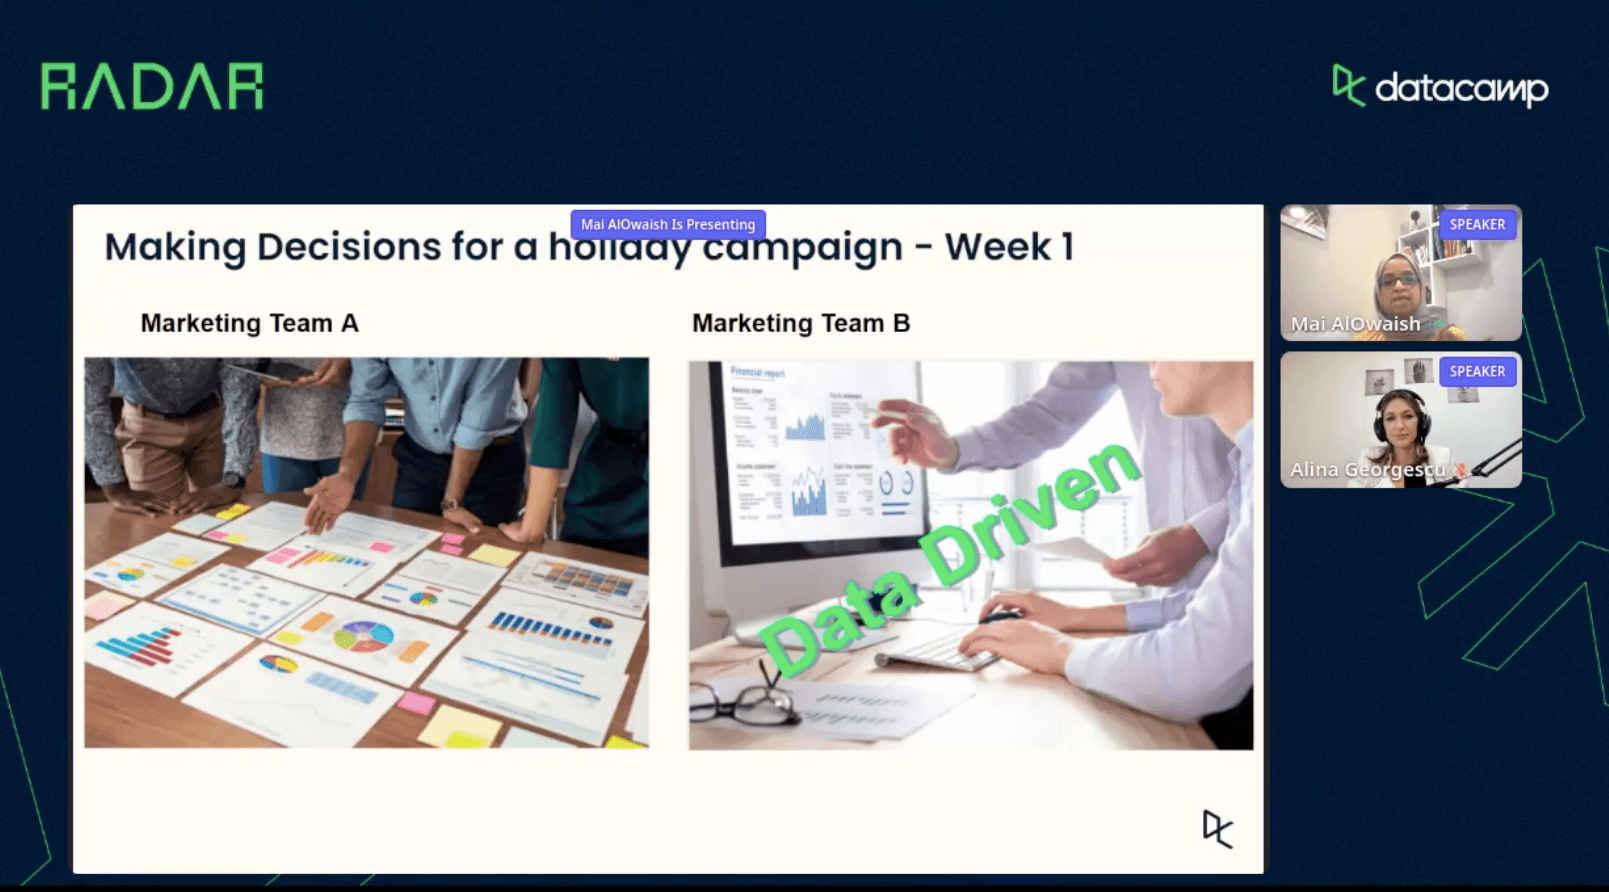 Making decisions for a holiday campaign slide